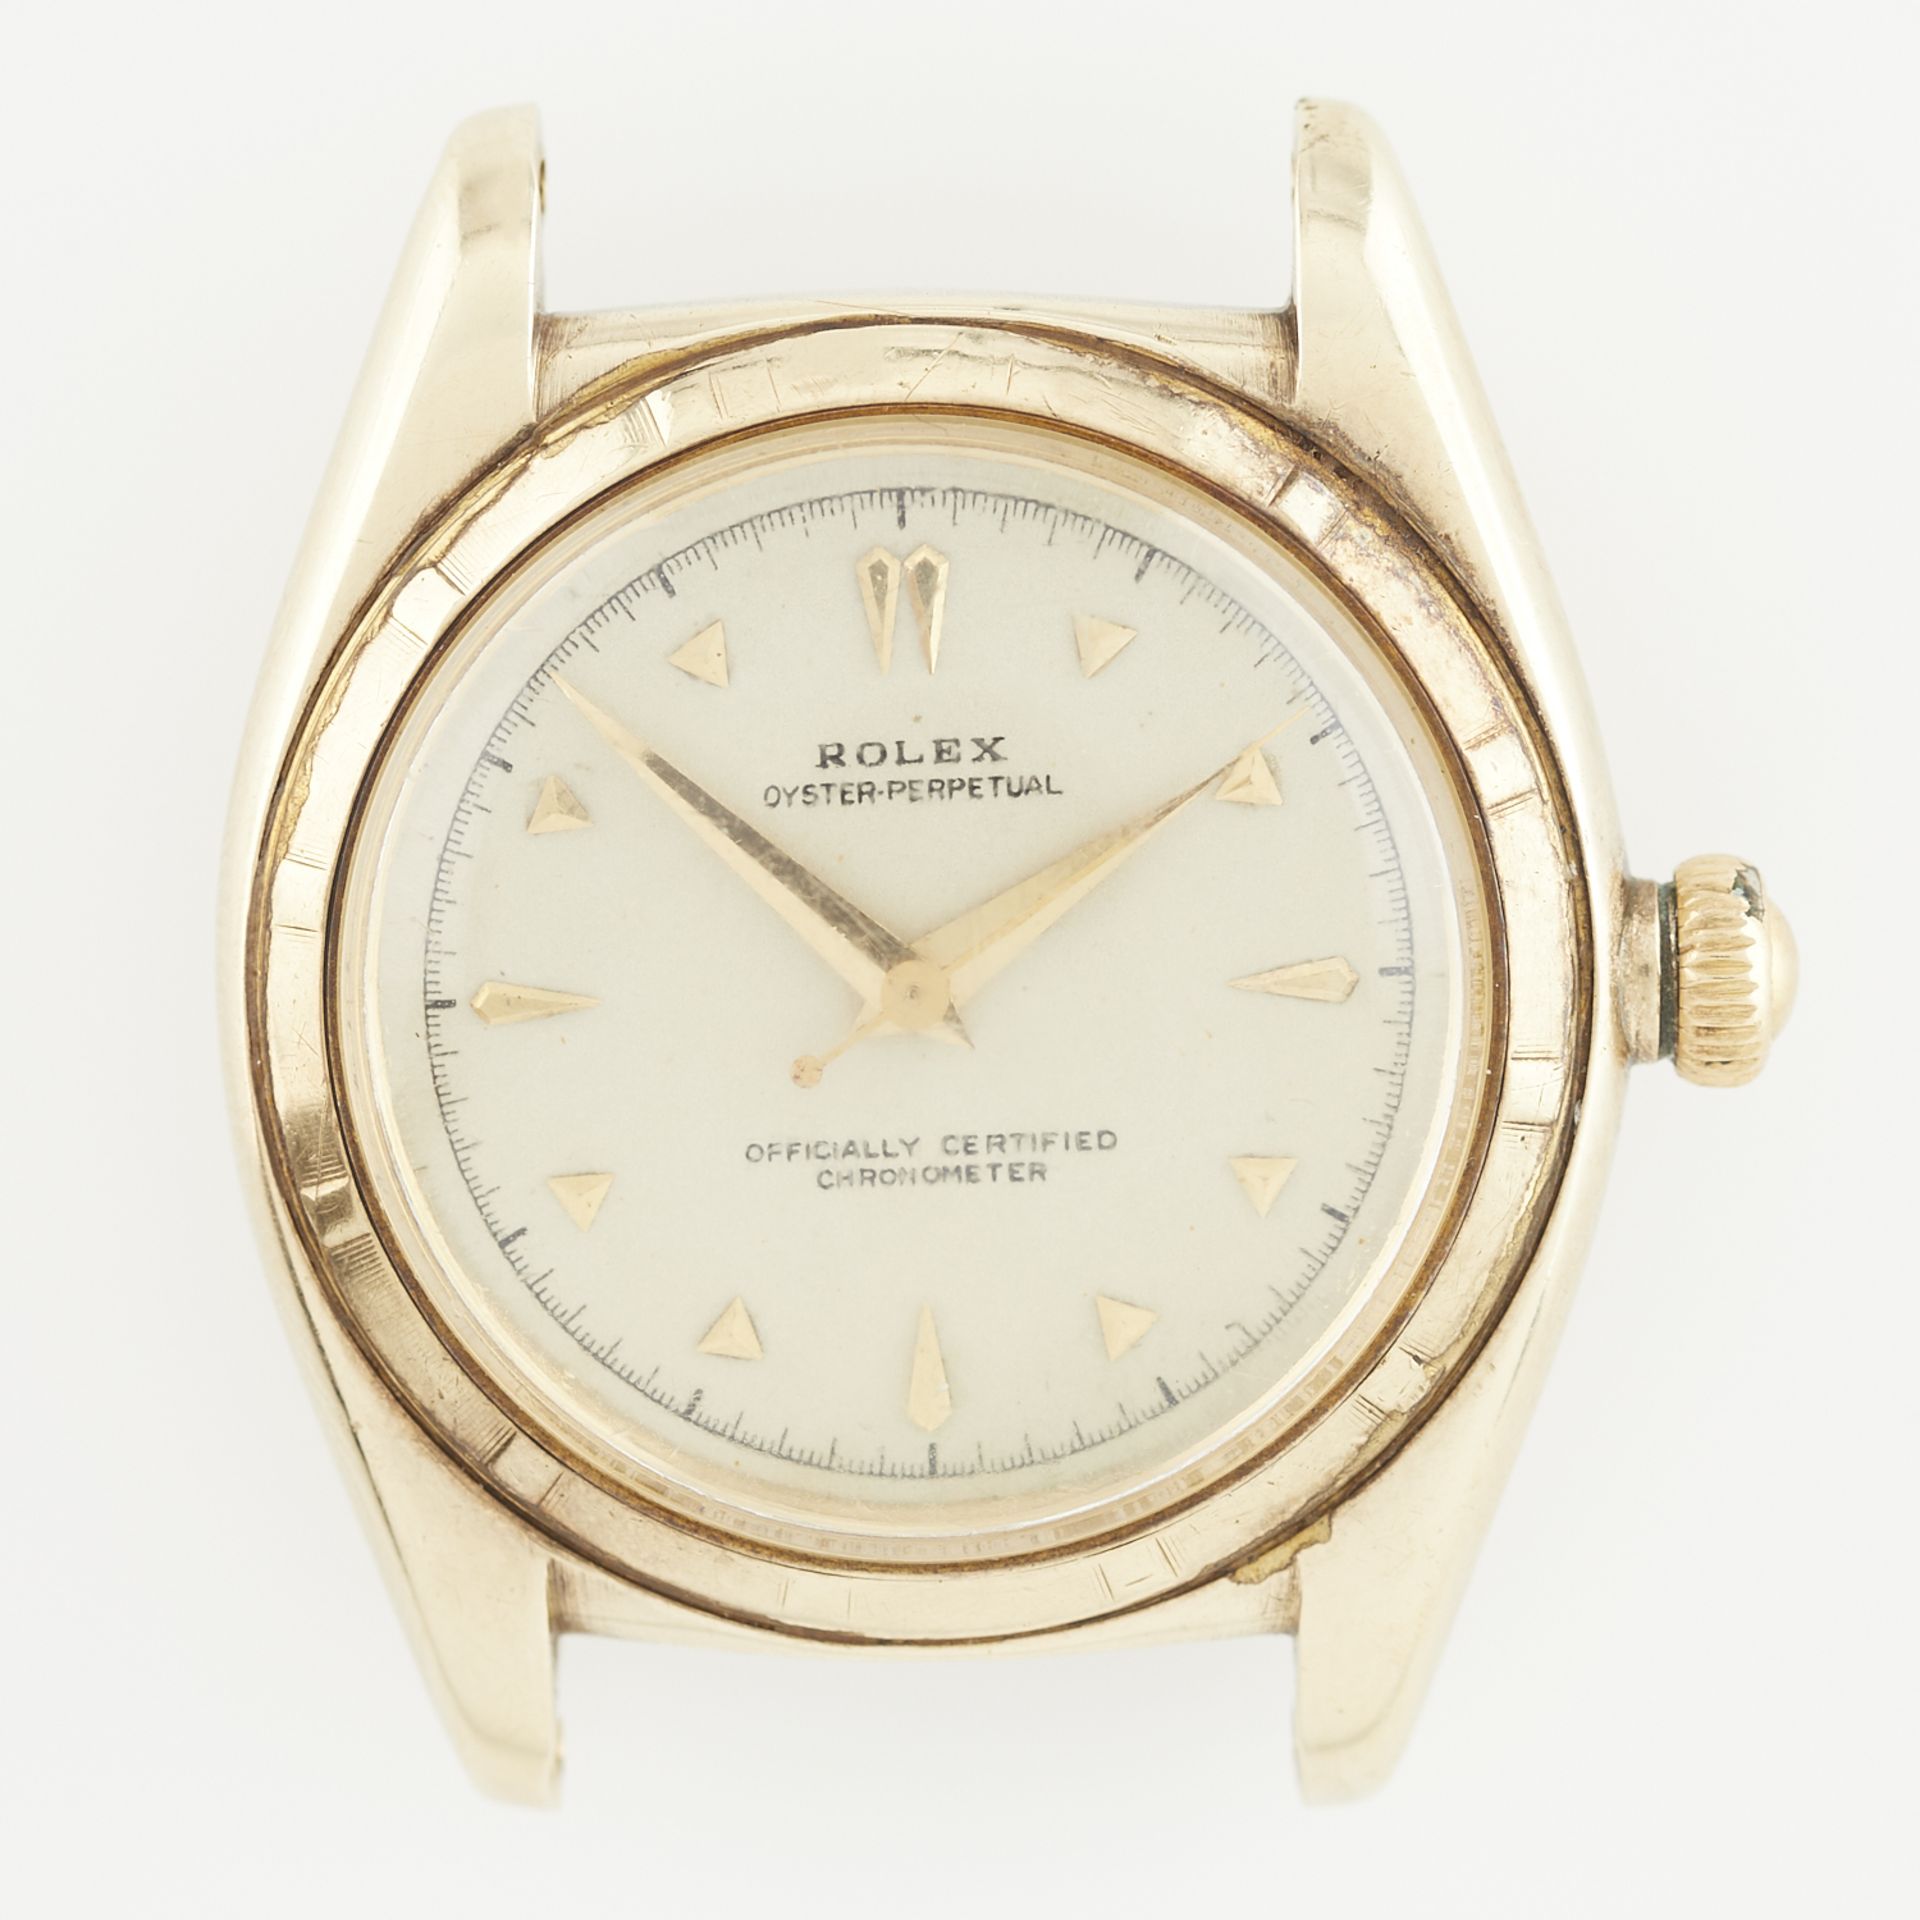 14k Rolex Oyster Perpetual 4777 Bubble Back - Image 11 of 14